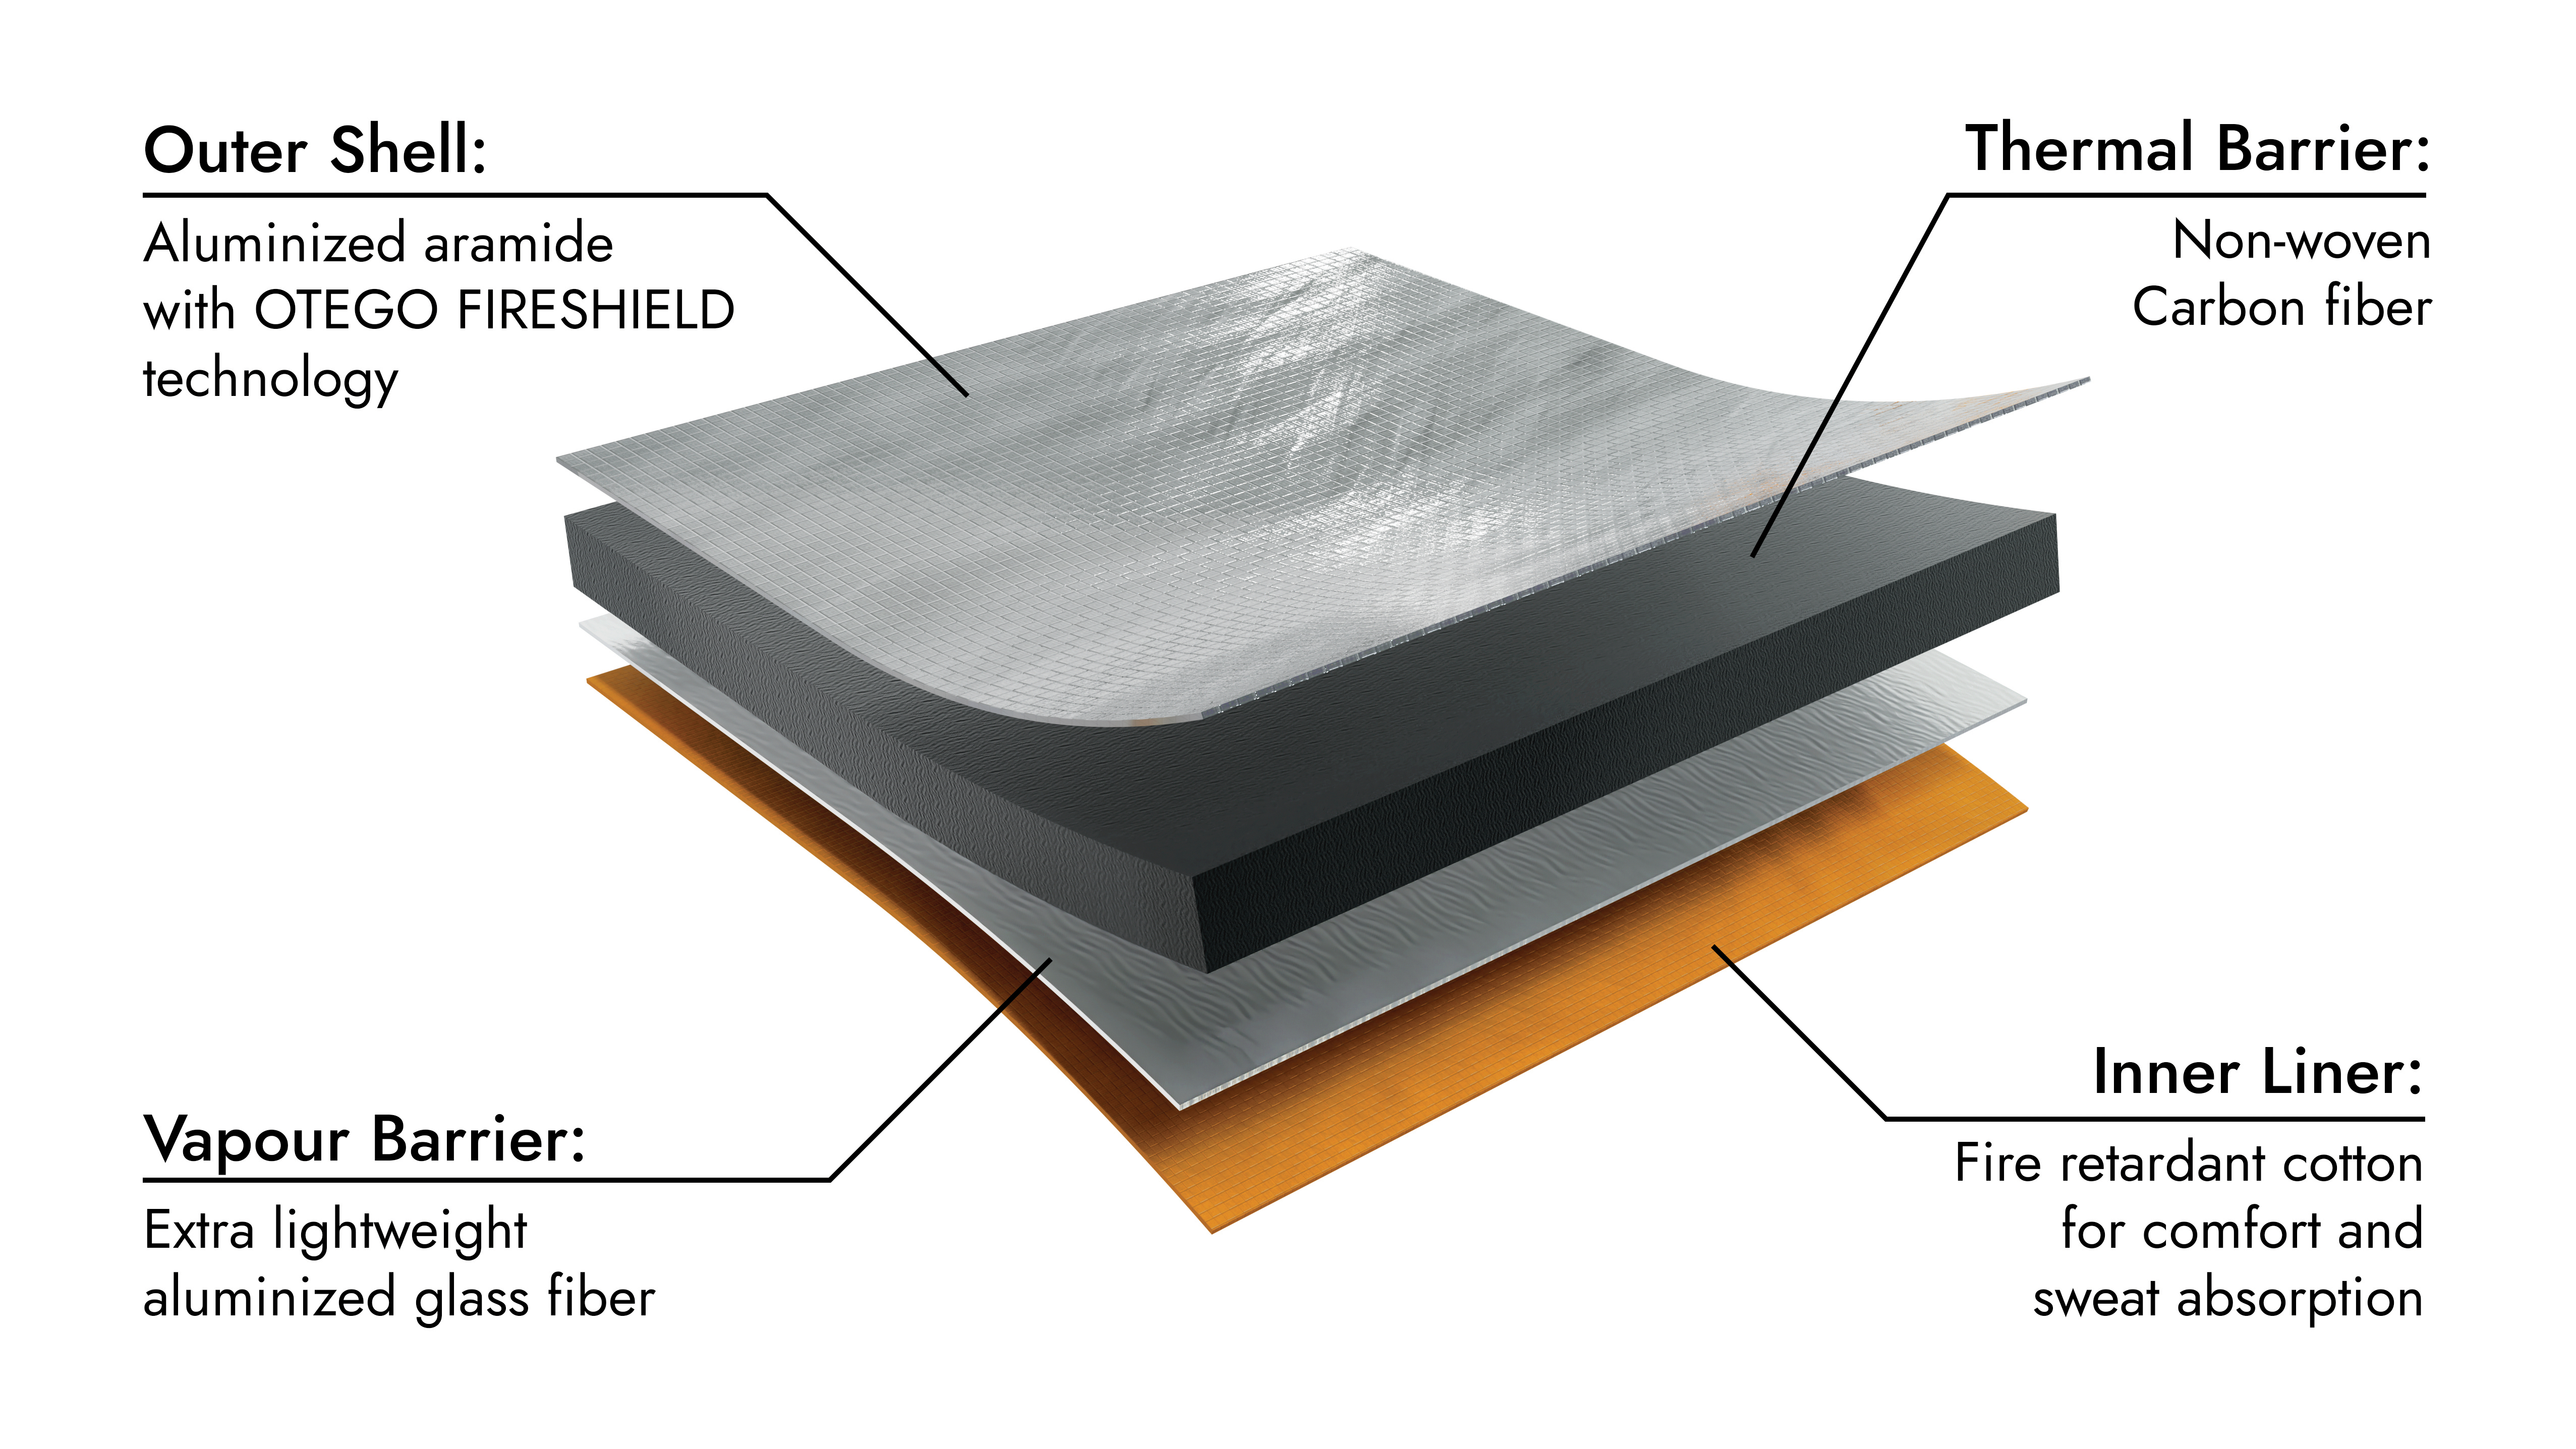 Fireshield Complex 4 layers with aluminized aramid, carbon fiver, fiverglass and fire retardant cotton